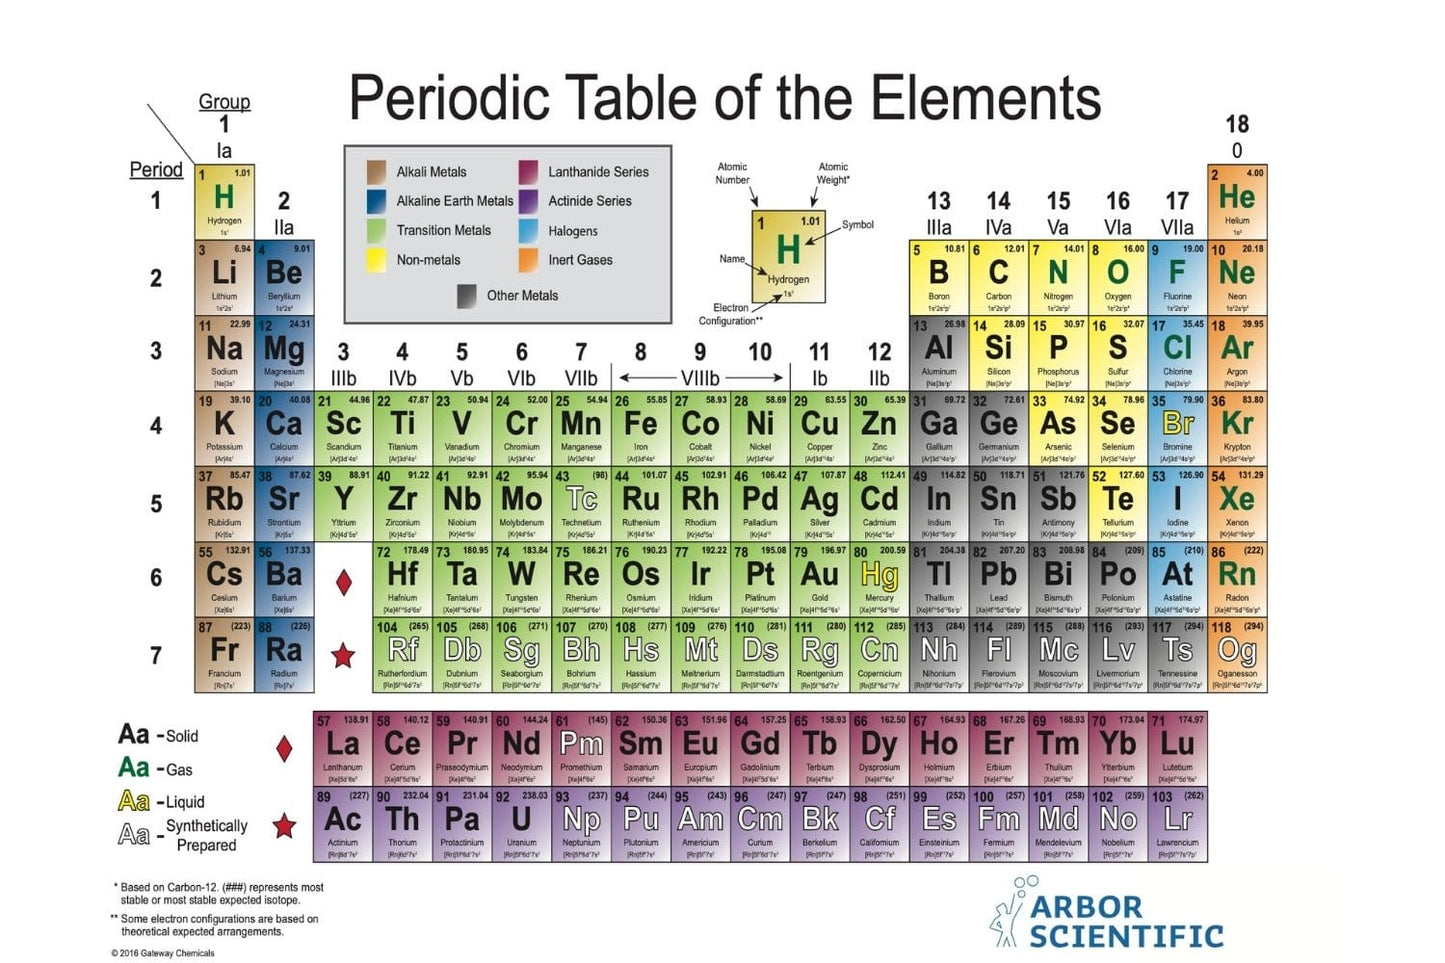 Arbor Scientific Periodic Table of the Elements - Binder Size